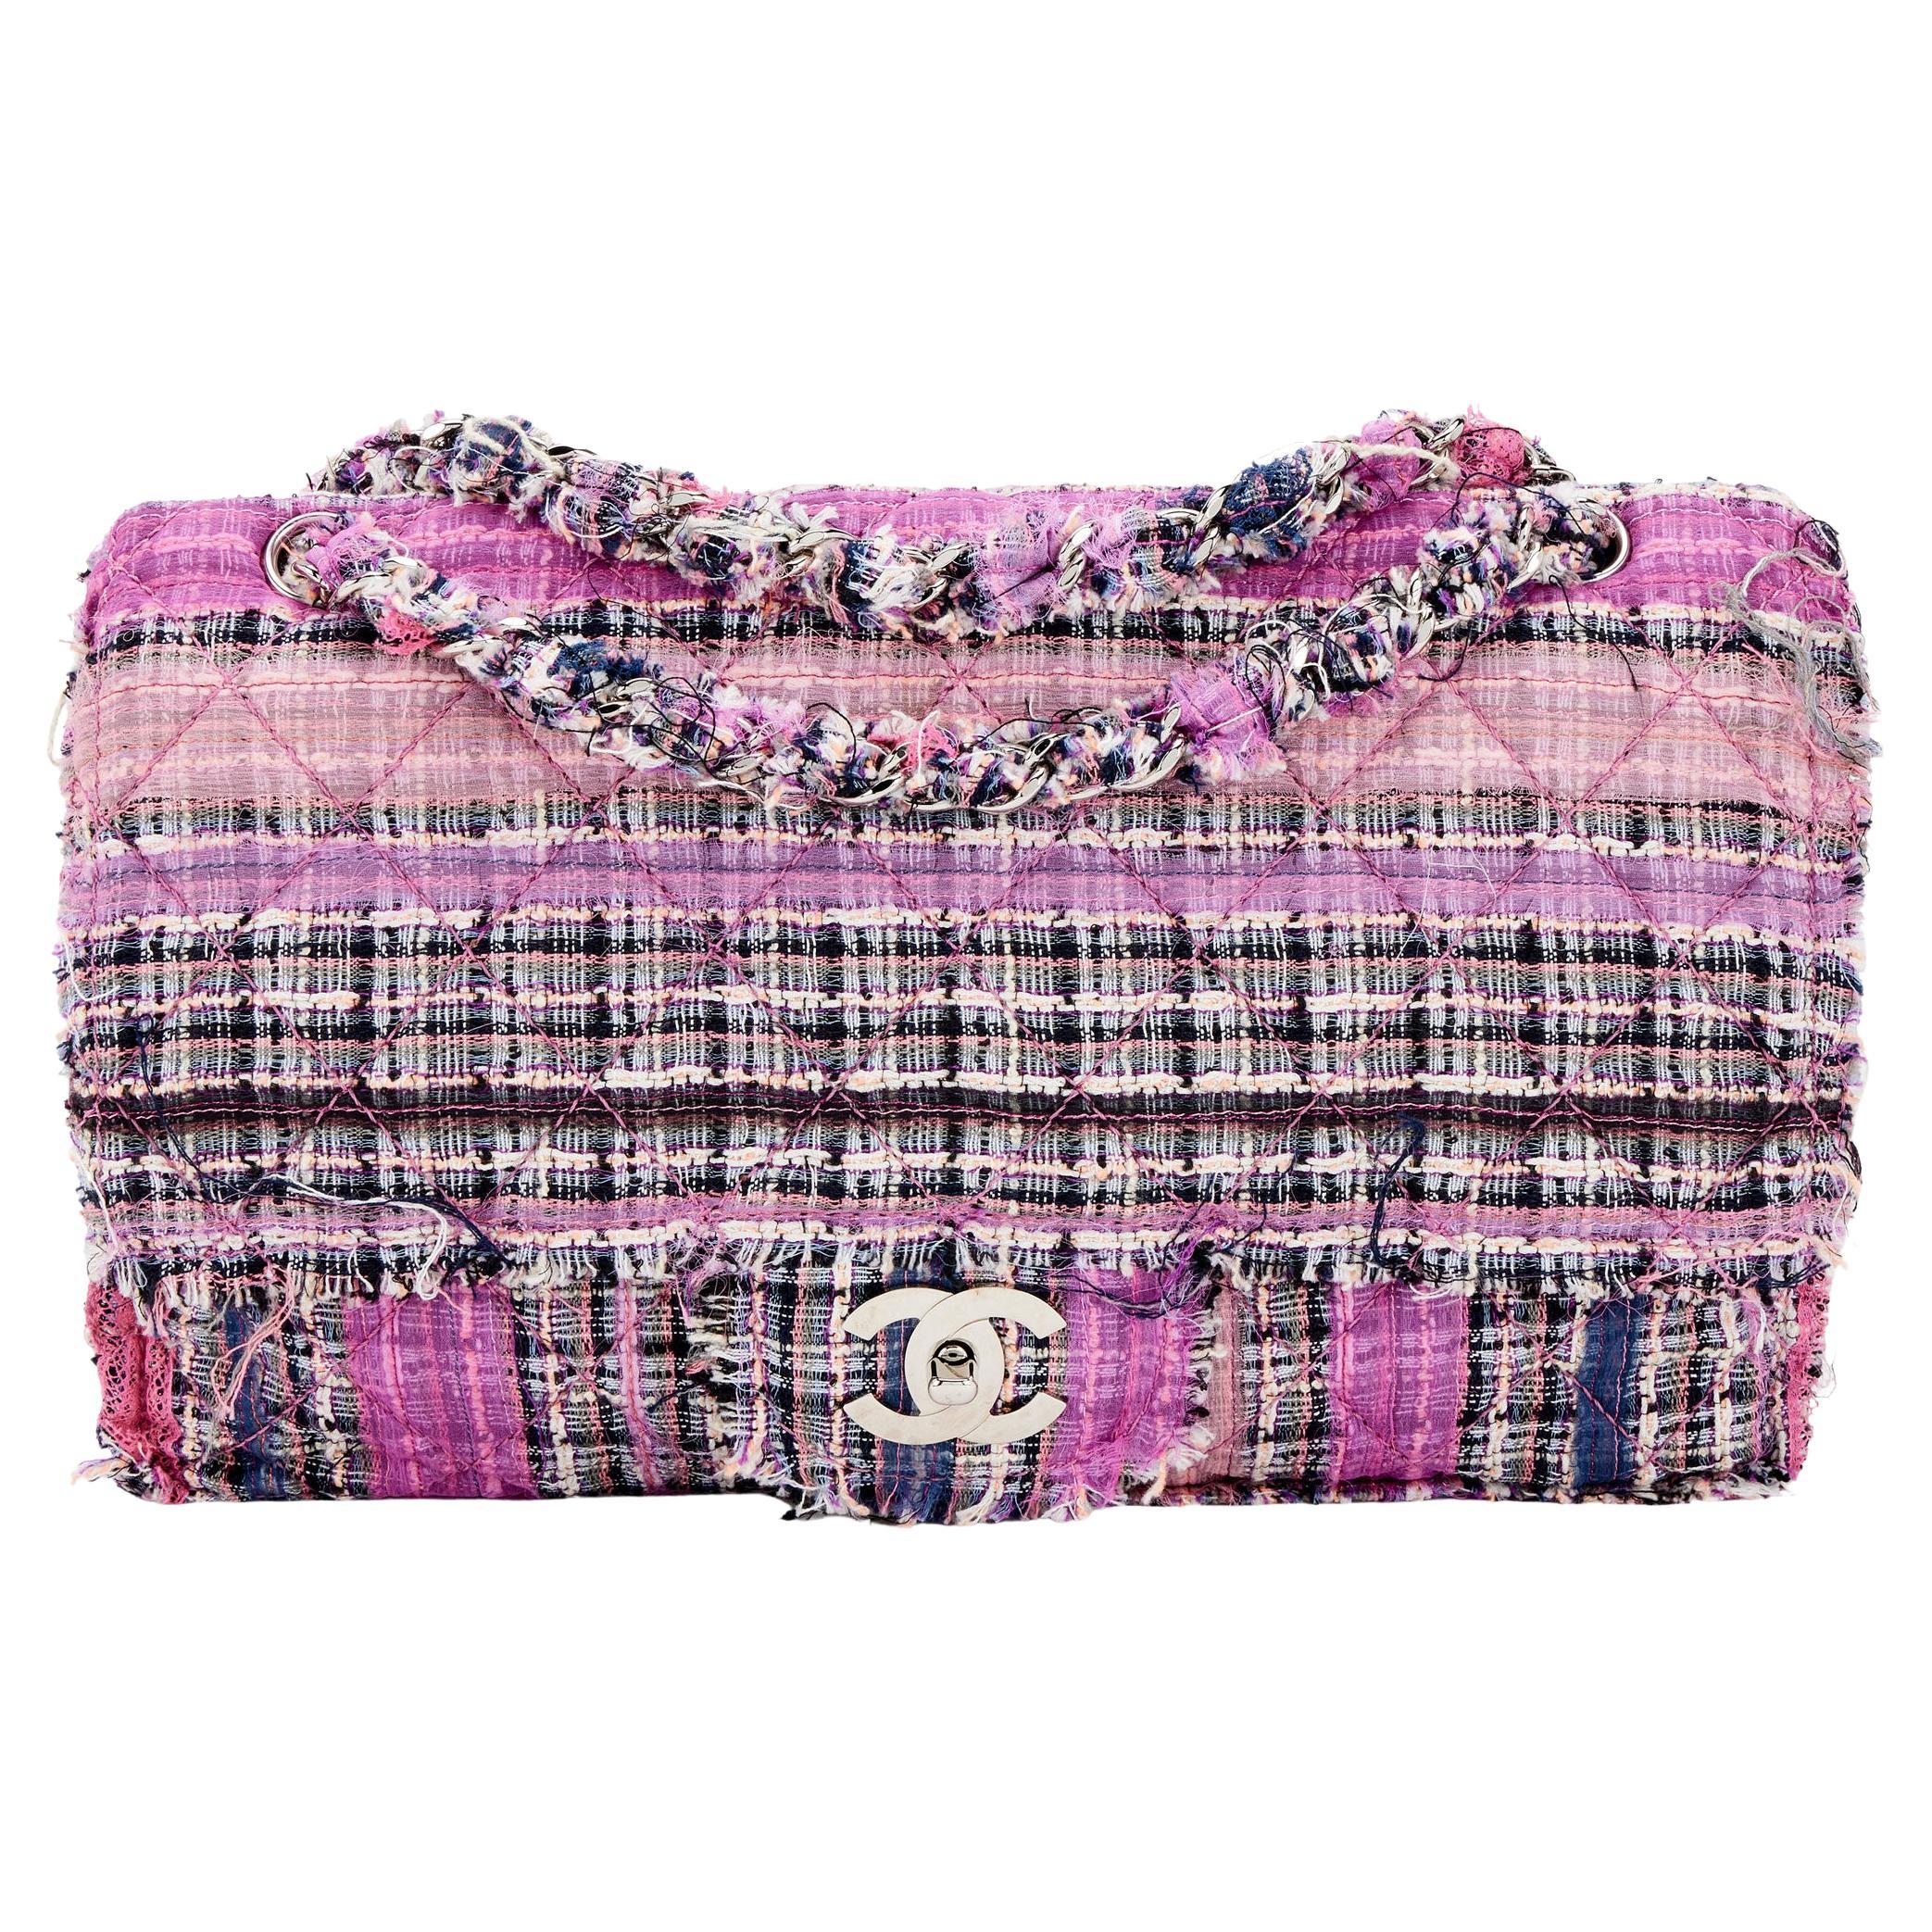 Chanel Classic Flap Fringe Jumbo Rare Limited Edition Pink Multi Color Tweed Bag